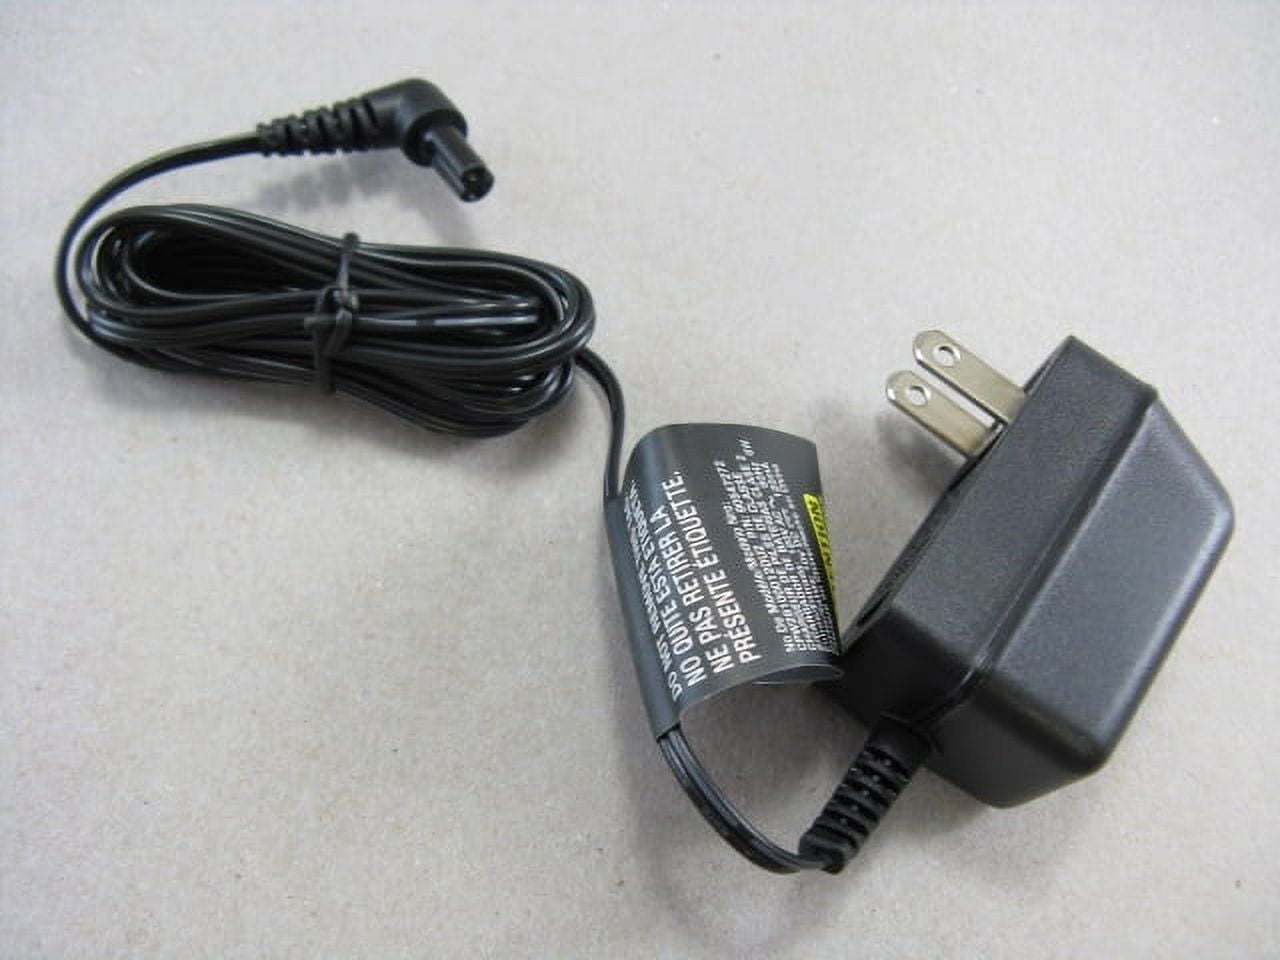 Black and Decker Replacement Lps7000 & Ldx172c Charger #90547272